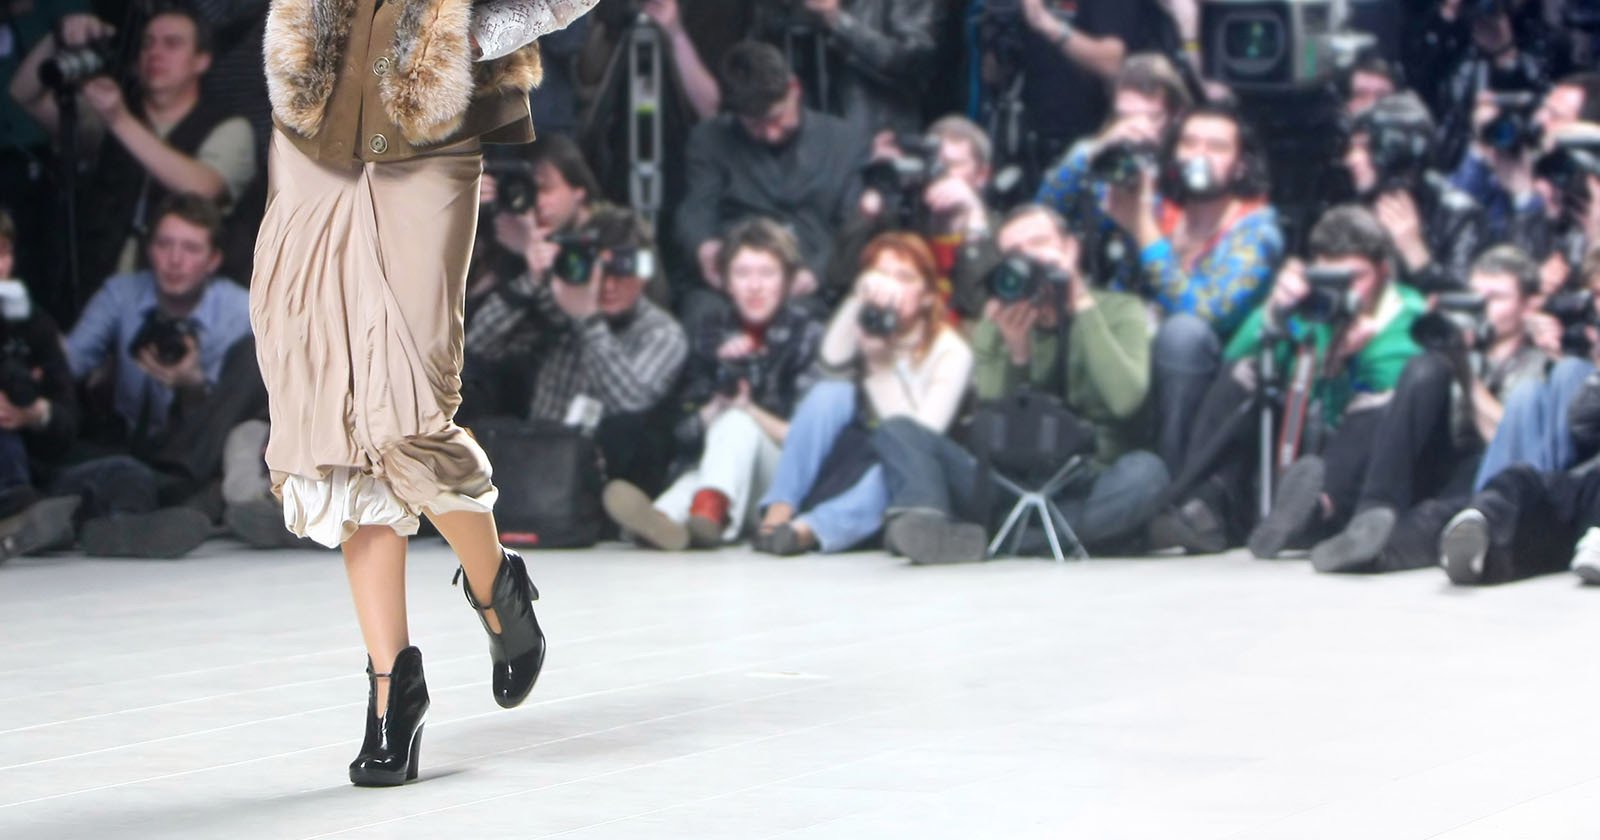 A model walking a runway is seen from the waist down and an audience and photographers are viewed in the background.